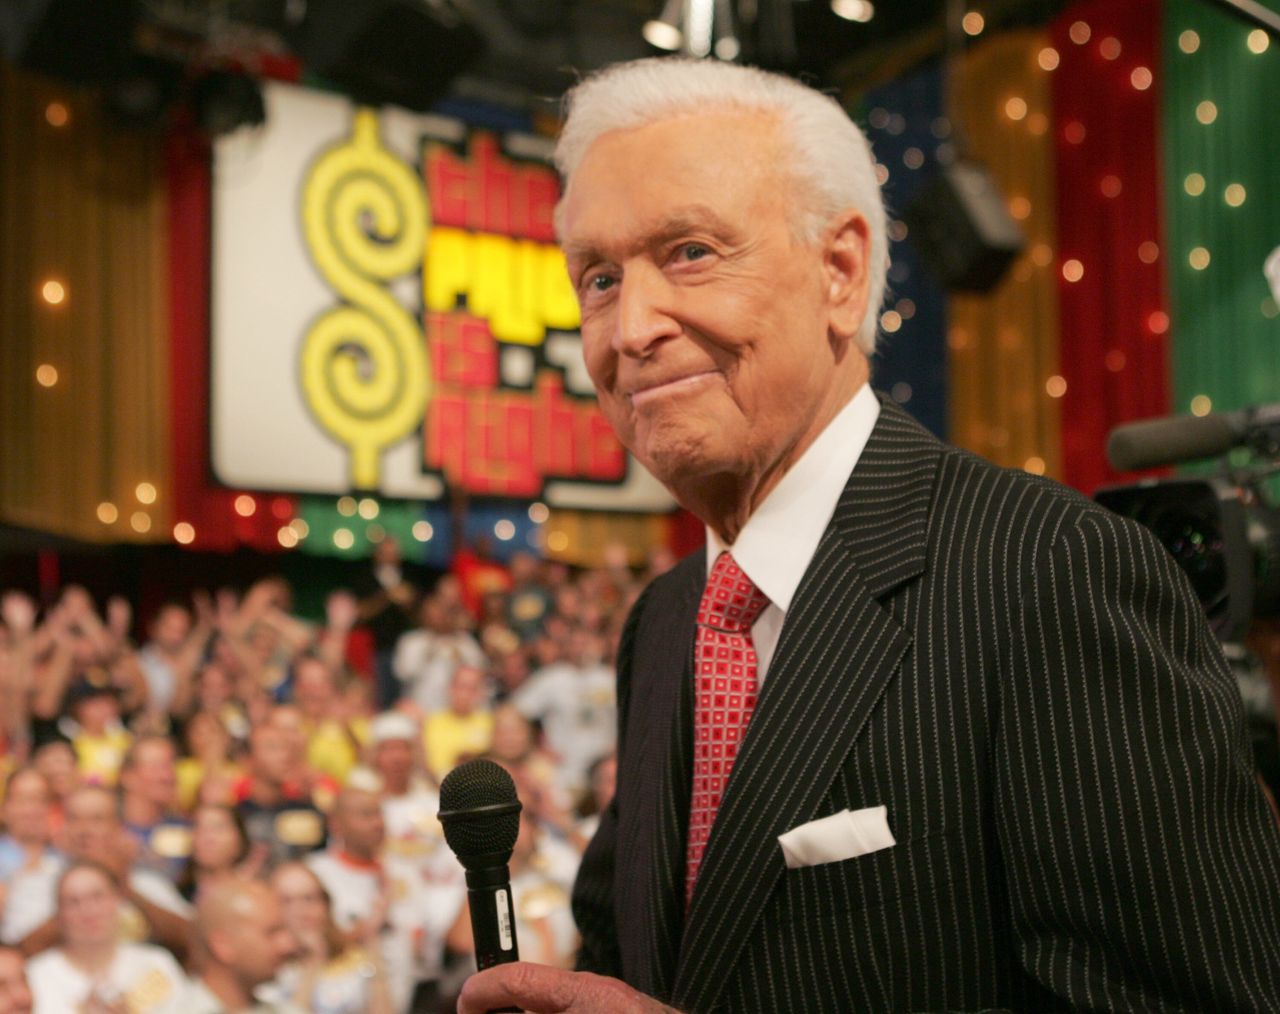 Barker is seen during the 35th anniversary premiere of "The Price Is Right" in California on Aug. 31, 2006.